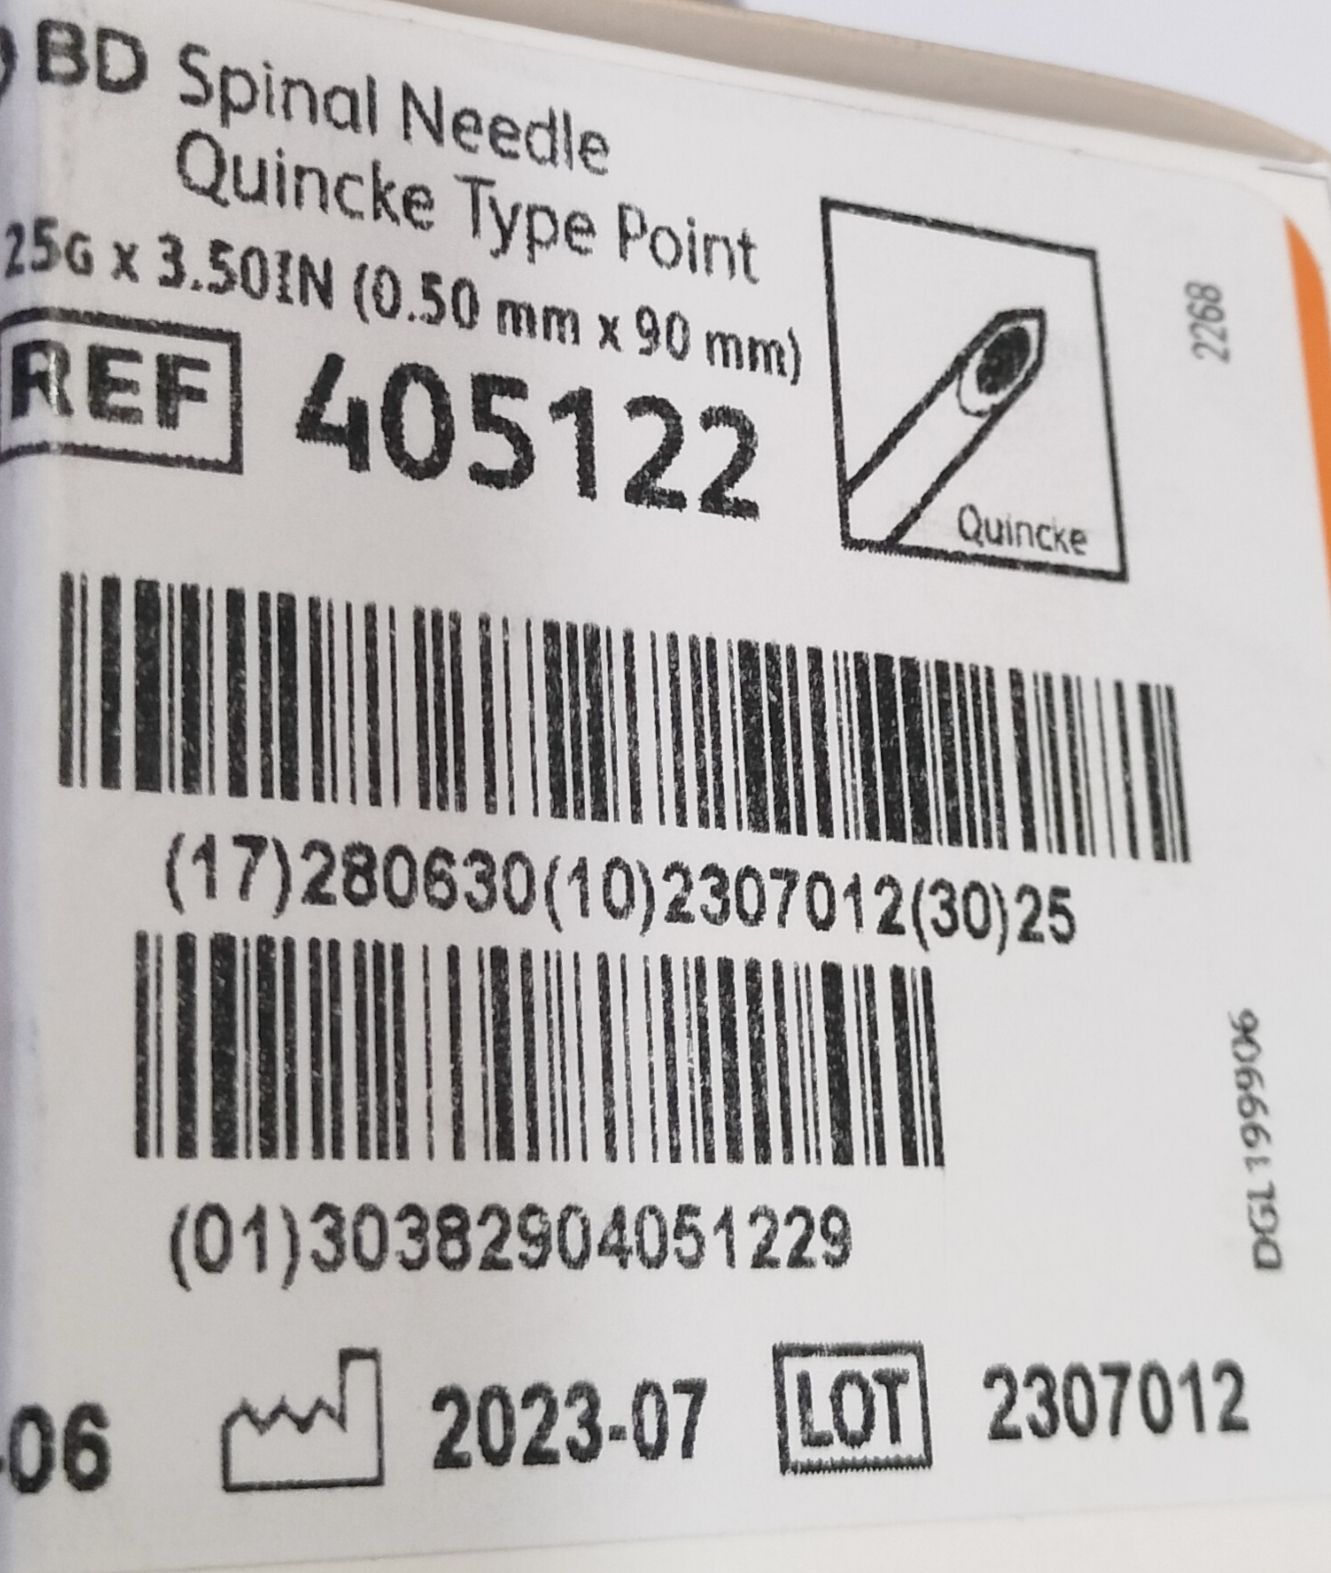 BD Spinal Needle quincke type point 26 G